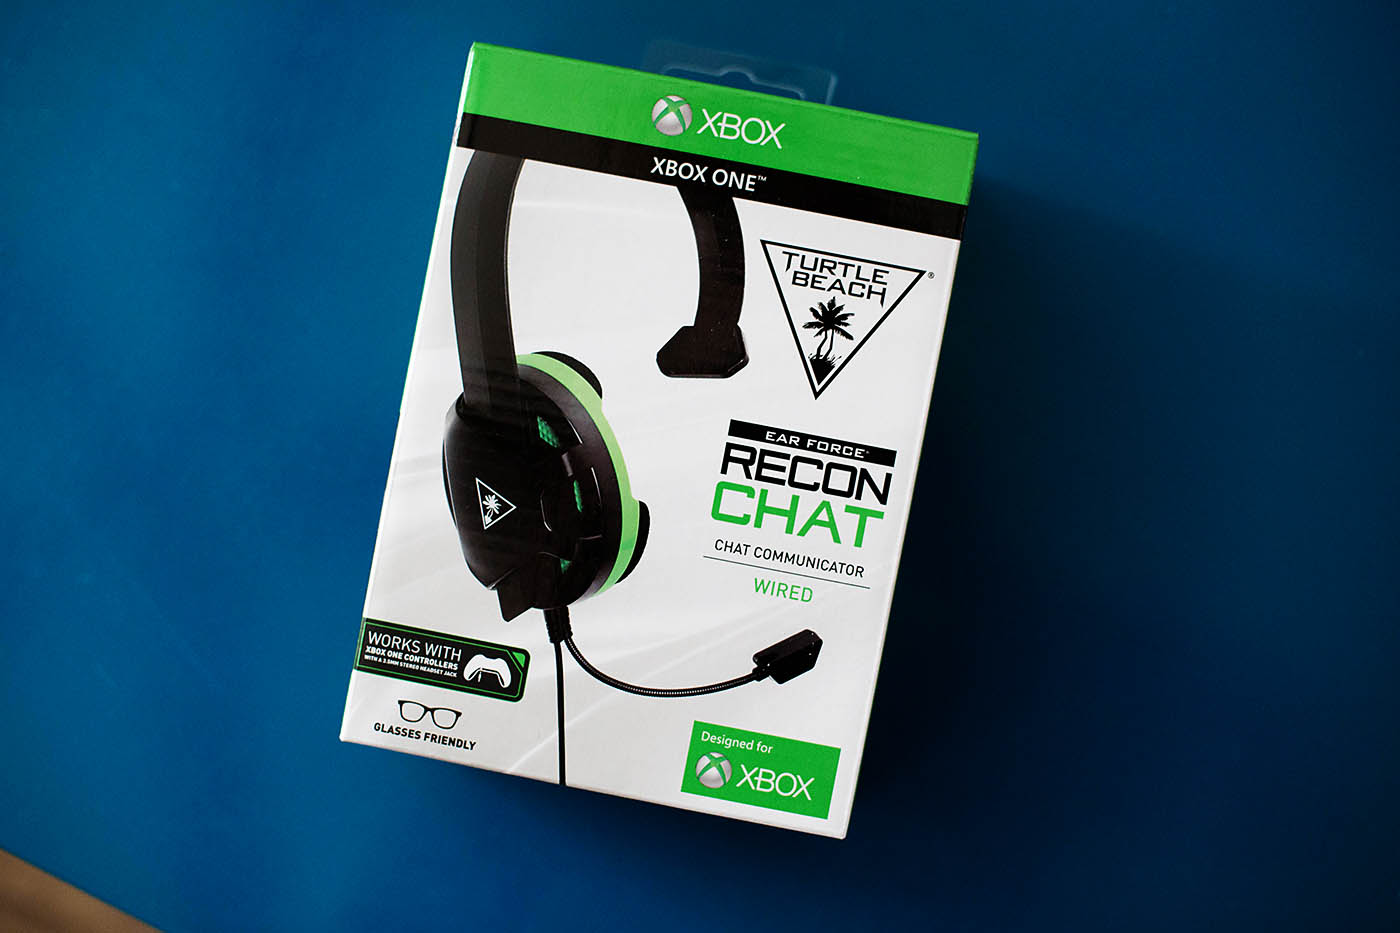 Turtle Beach RECON CHAT headset and a giveaway!